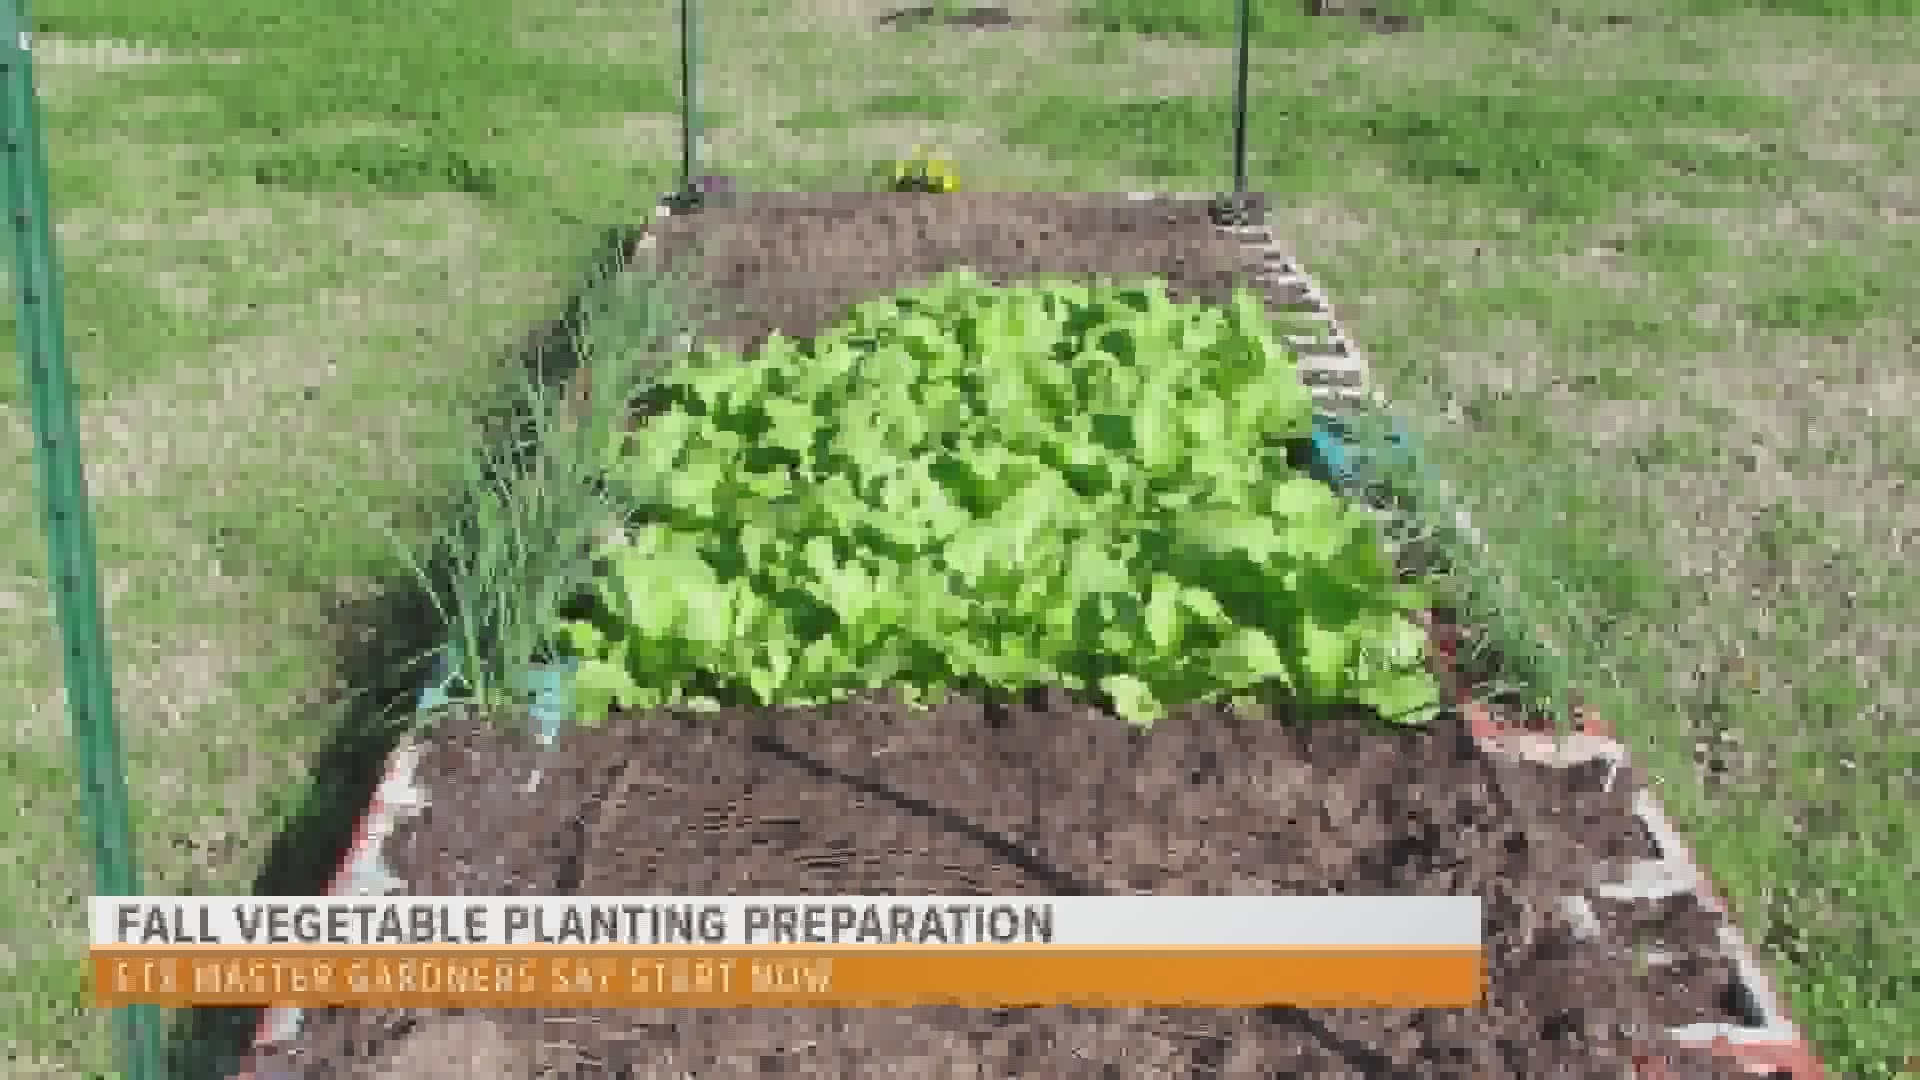 If you haven't already, now is the perfect time to start prepping your garden for those fall vegetables.